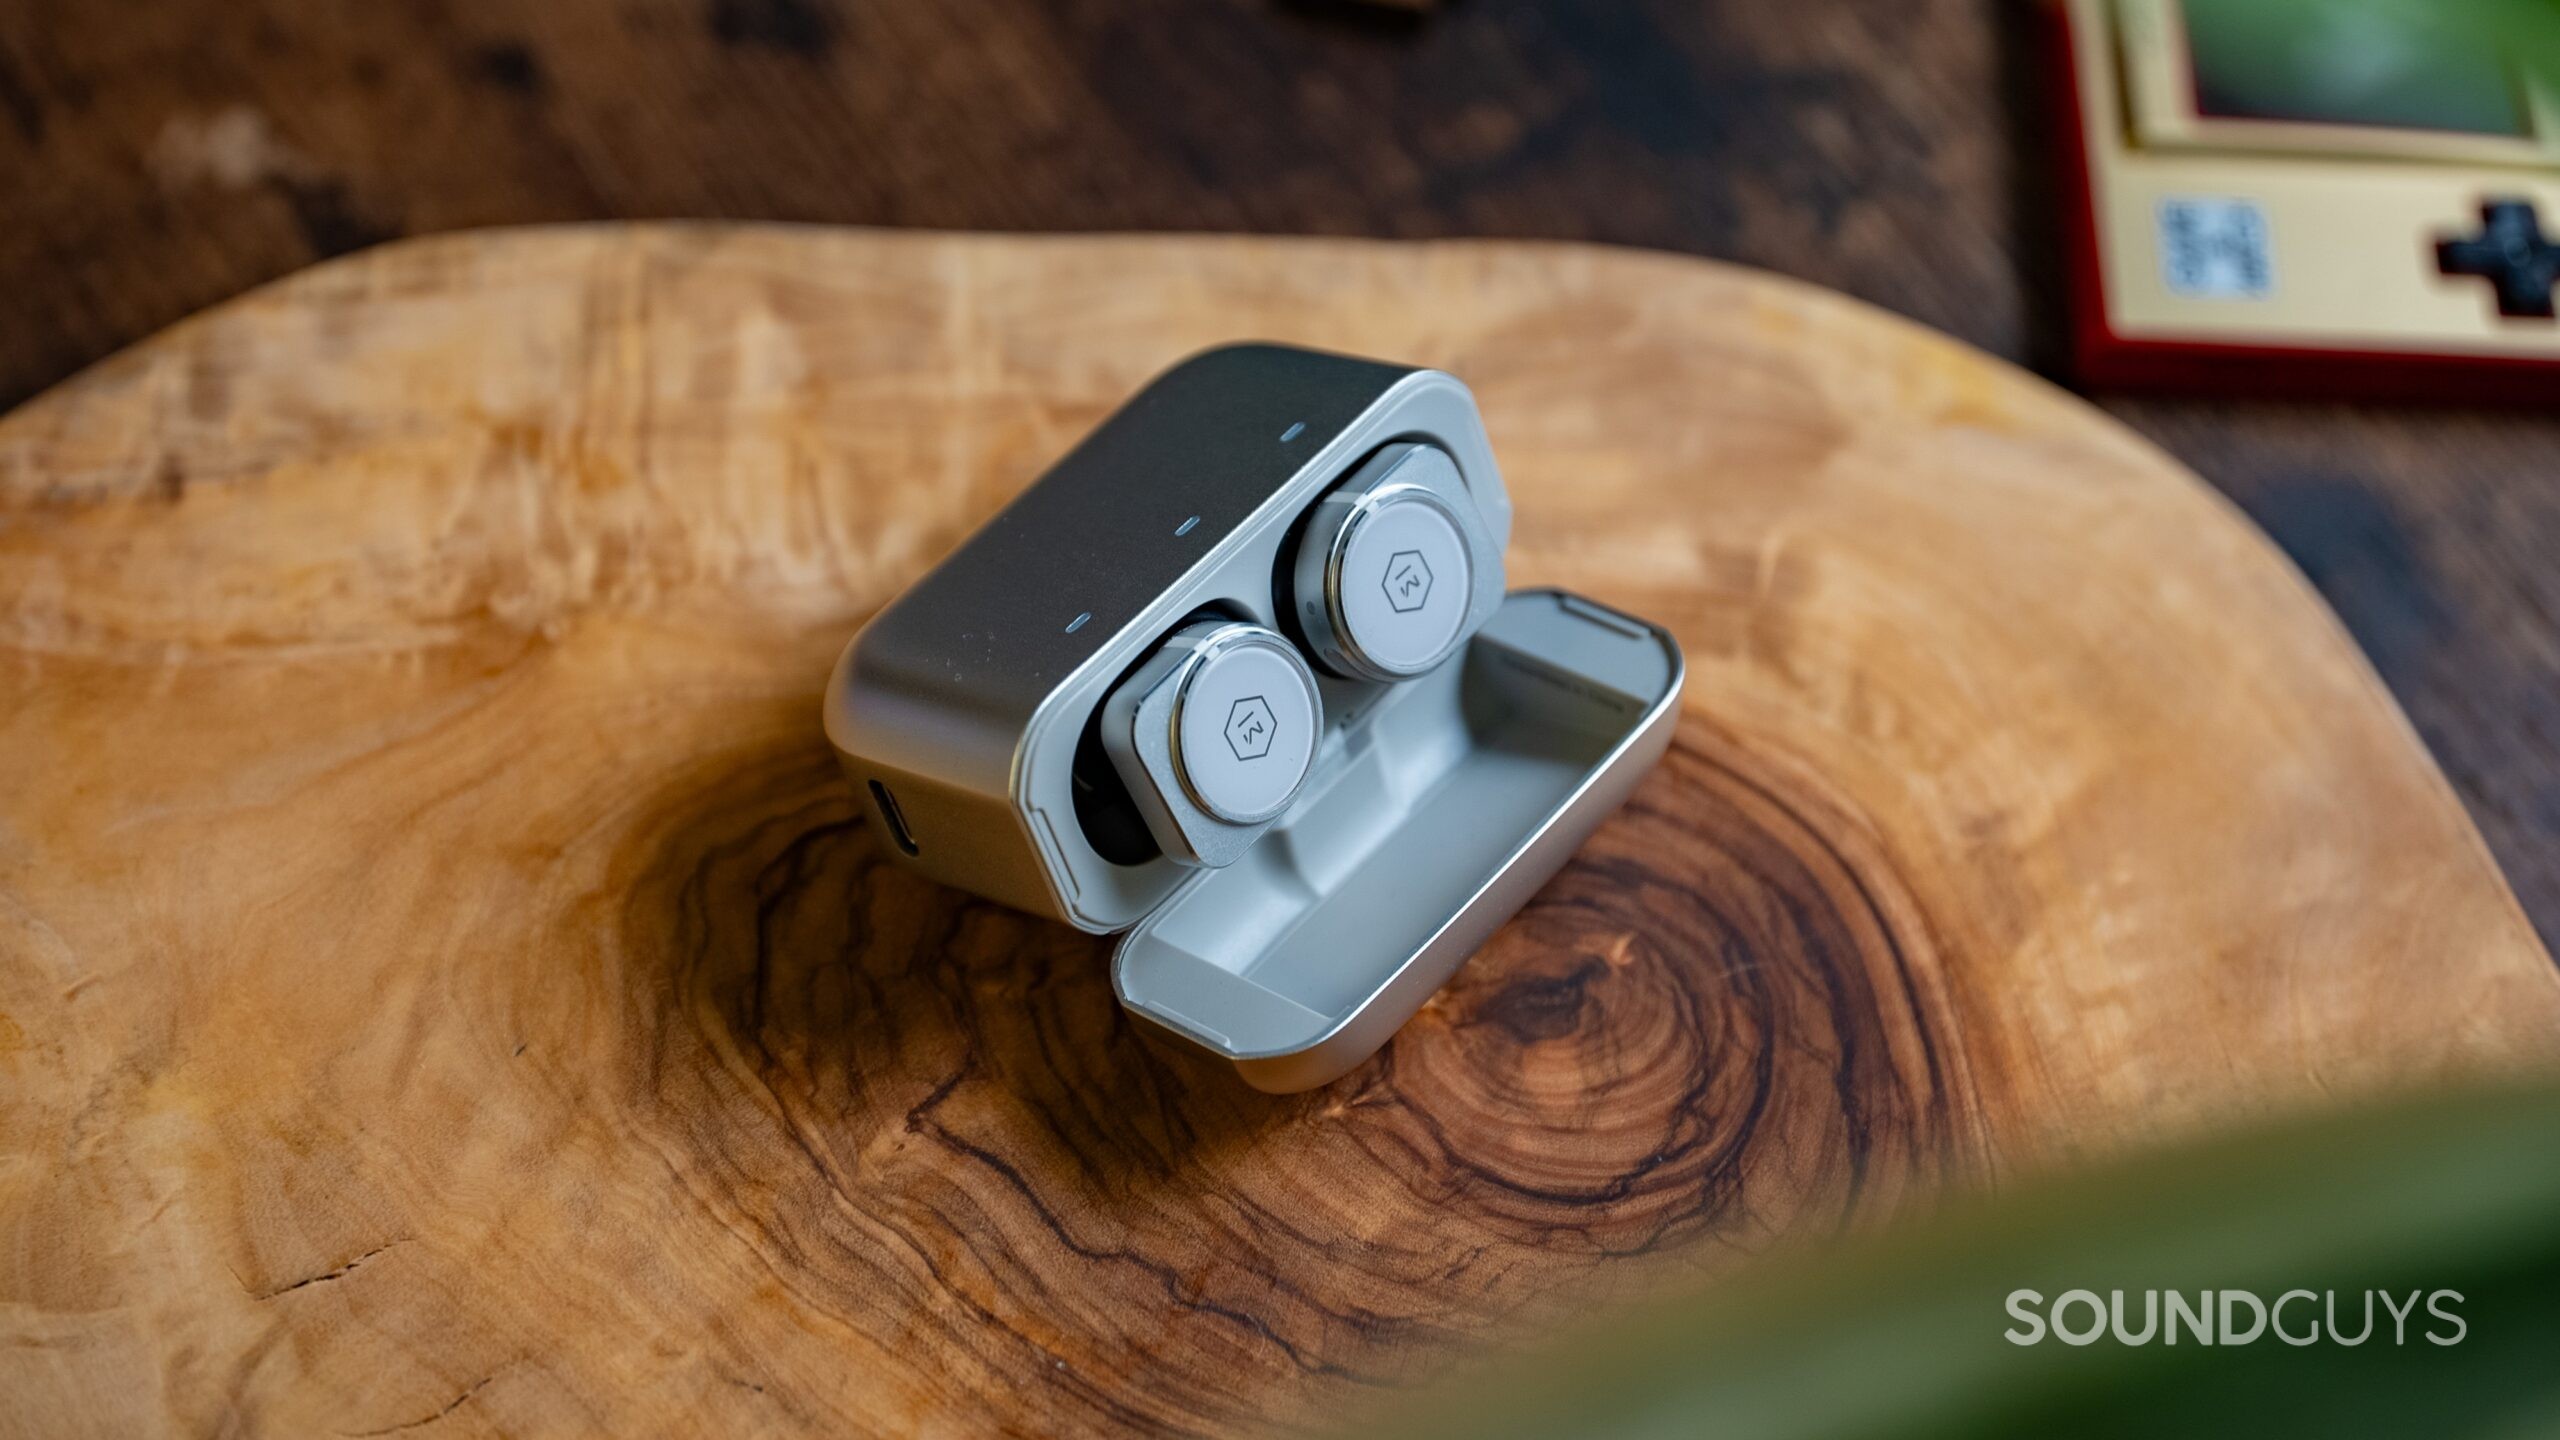 Master &amp; Dynamic MW09 earbuds in their charging case.